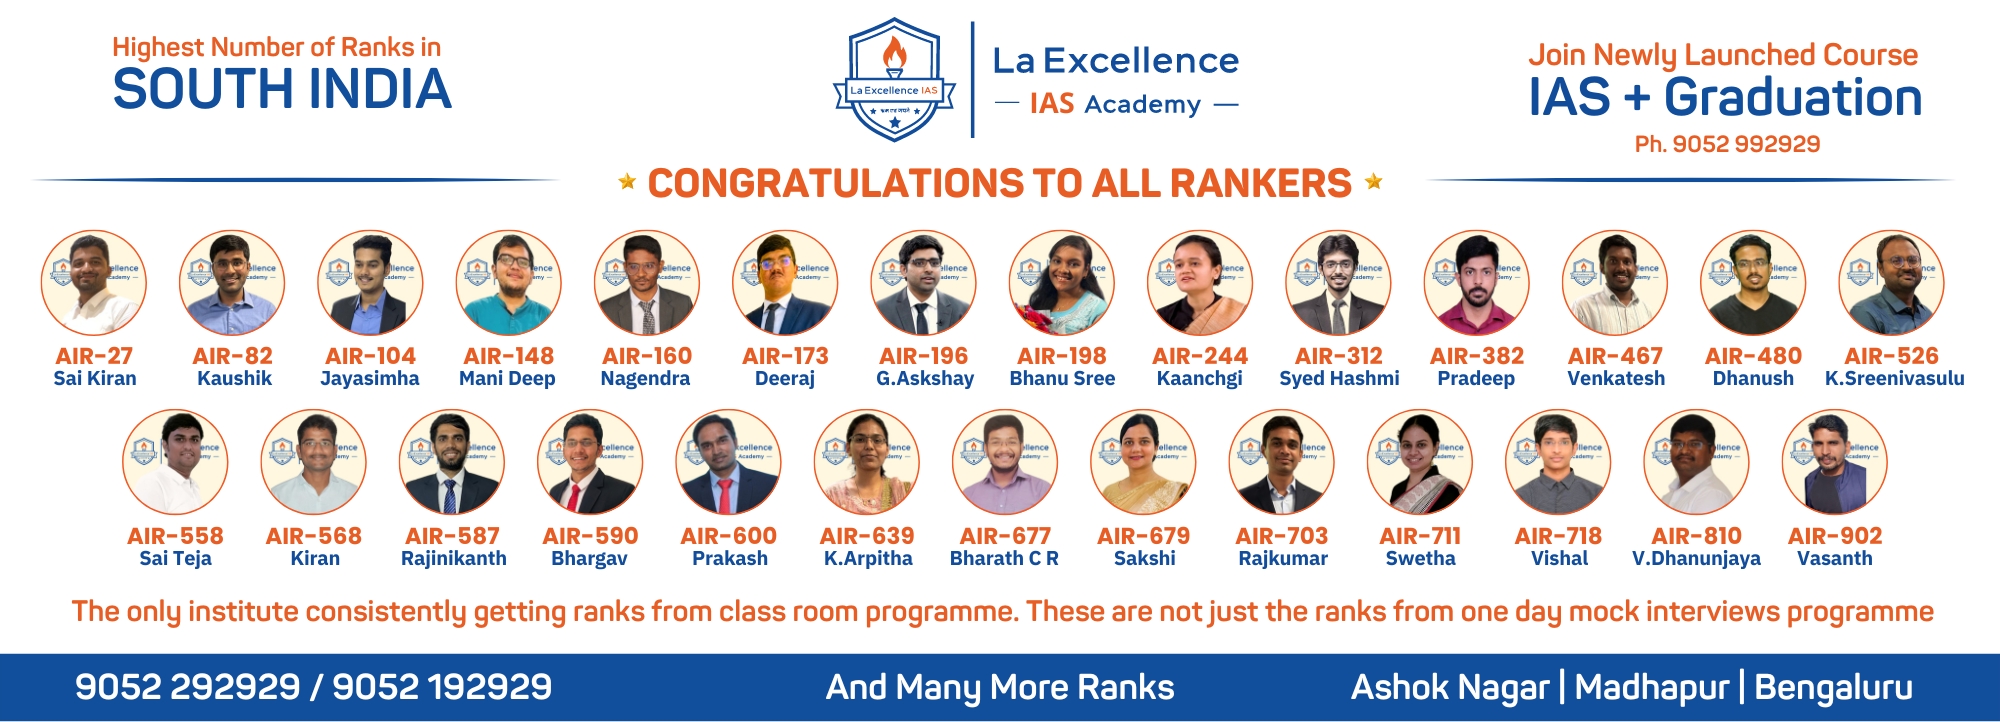 Highest Number of Ranks in South India | La Excellence IAS Academy